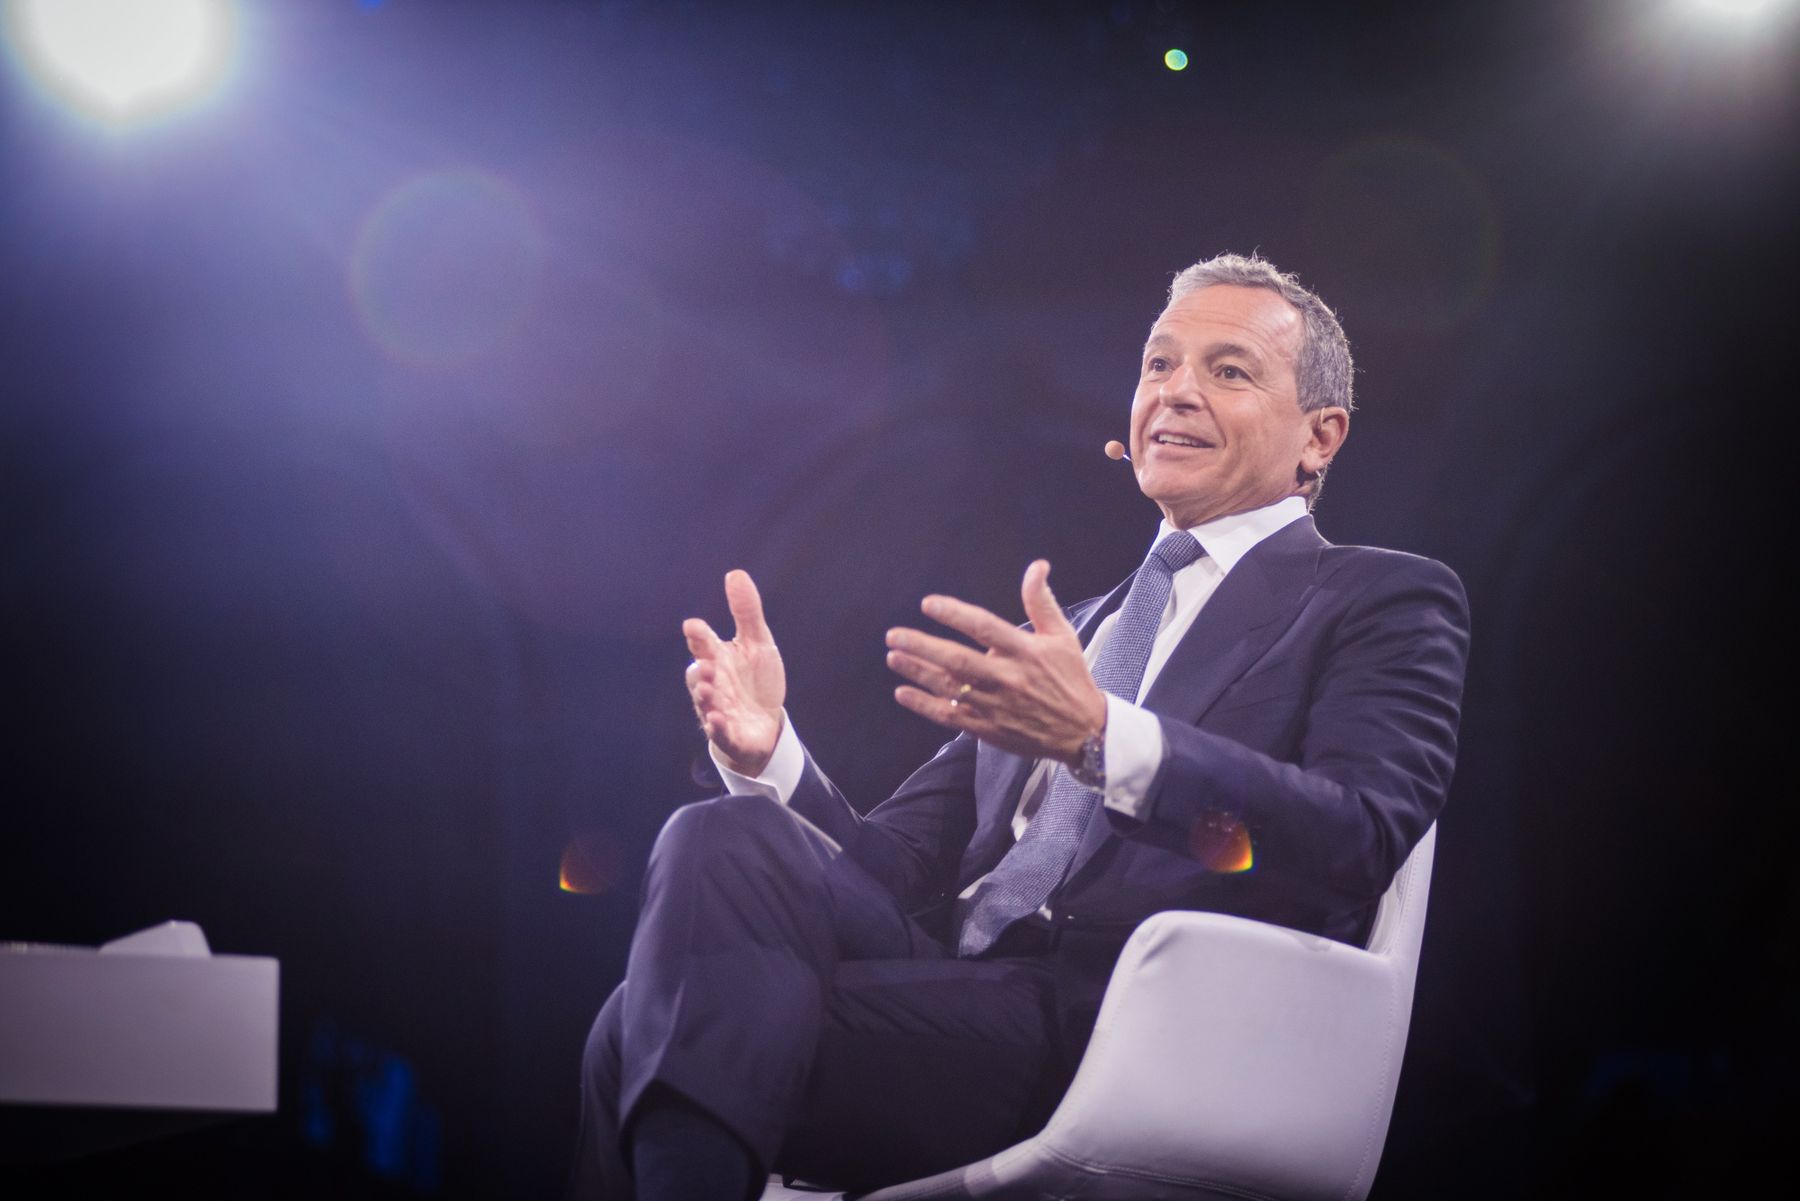 “What People Believe is News is Really Opinion” — Former Disney CEO Bob Iger Comments on the Media